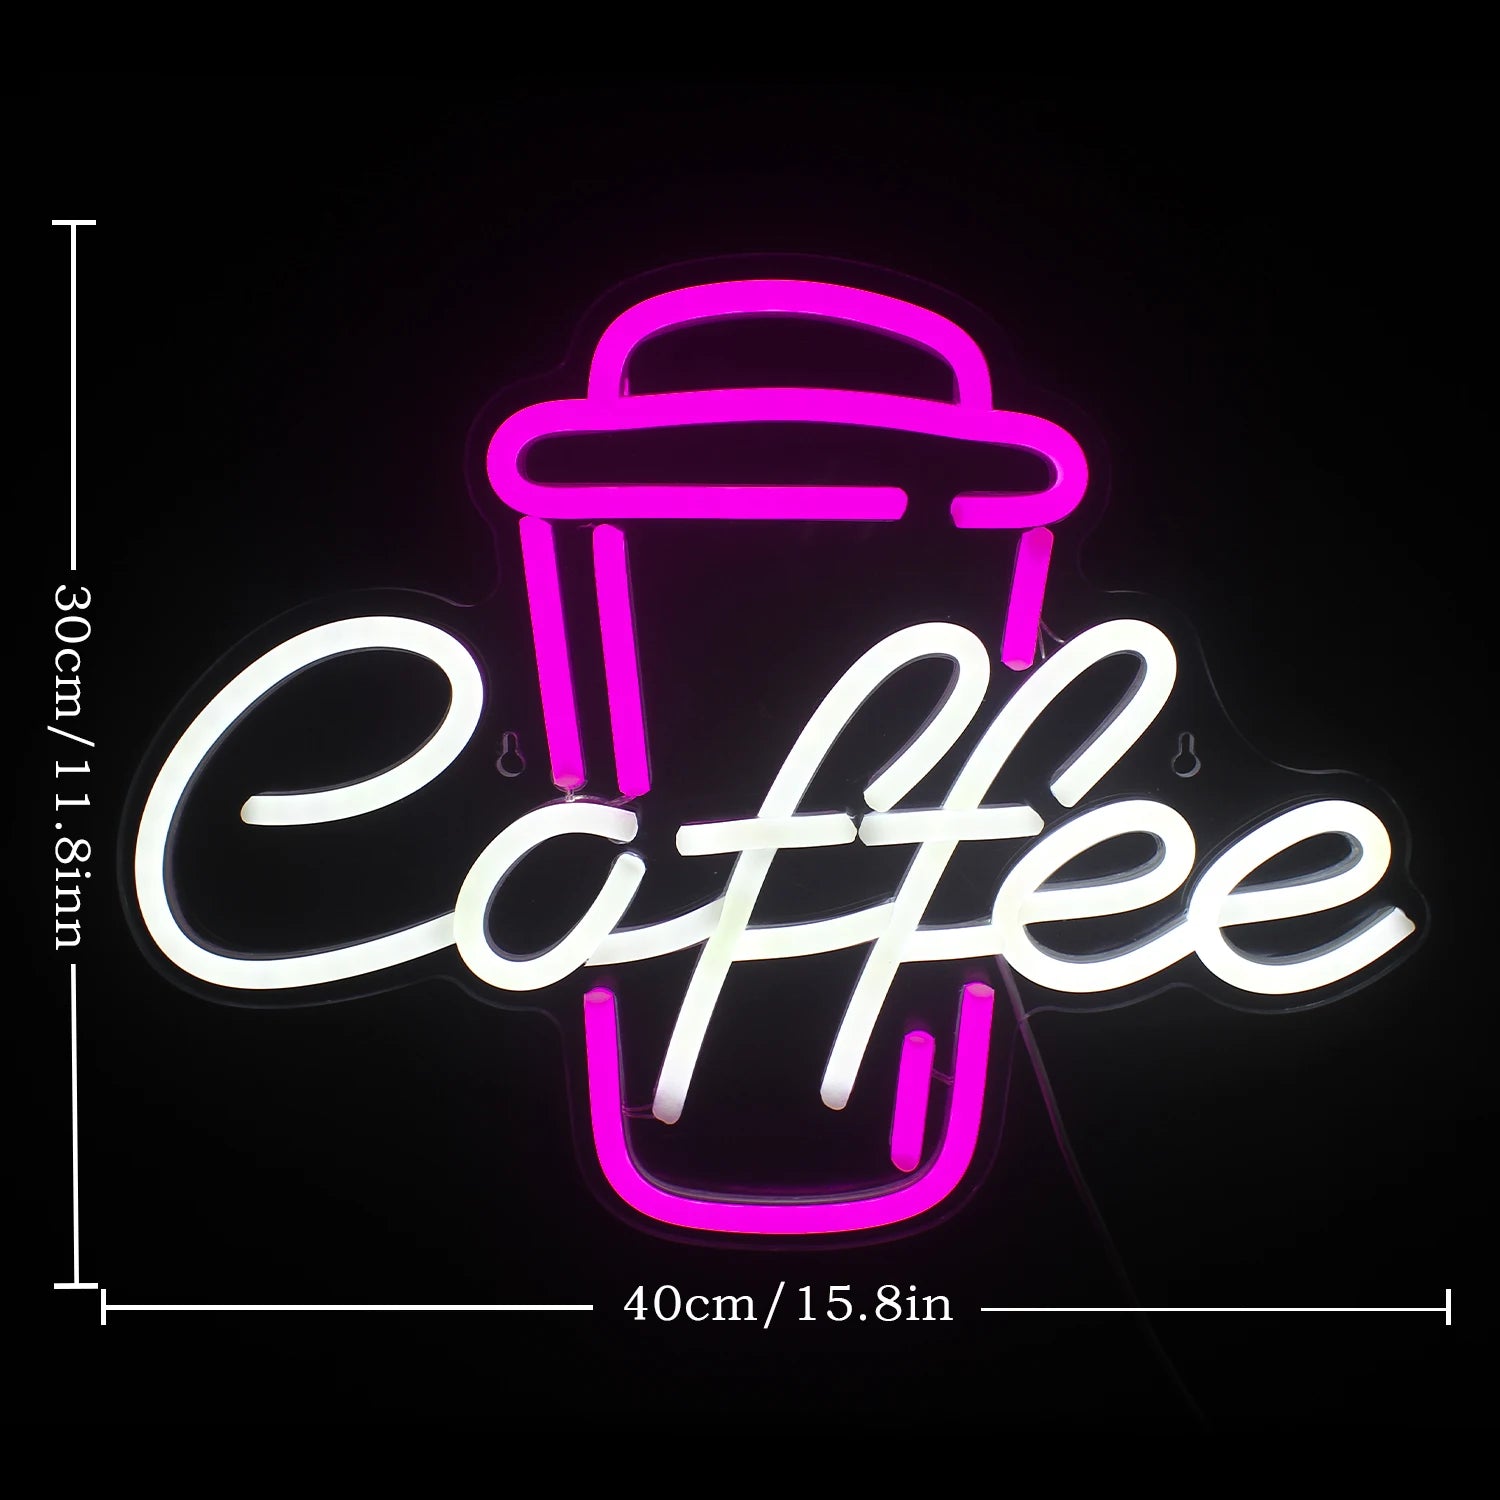 Ineonlife Neon Light Coffee Cup Luminous LED Sign Party Cafe Shop Birthday Reunion Room Home Mural Personality Wall Decoration